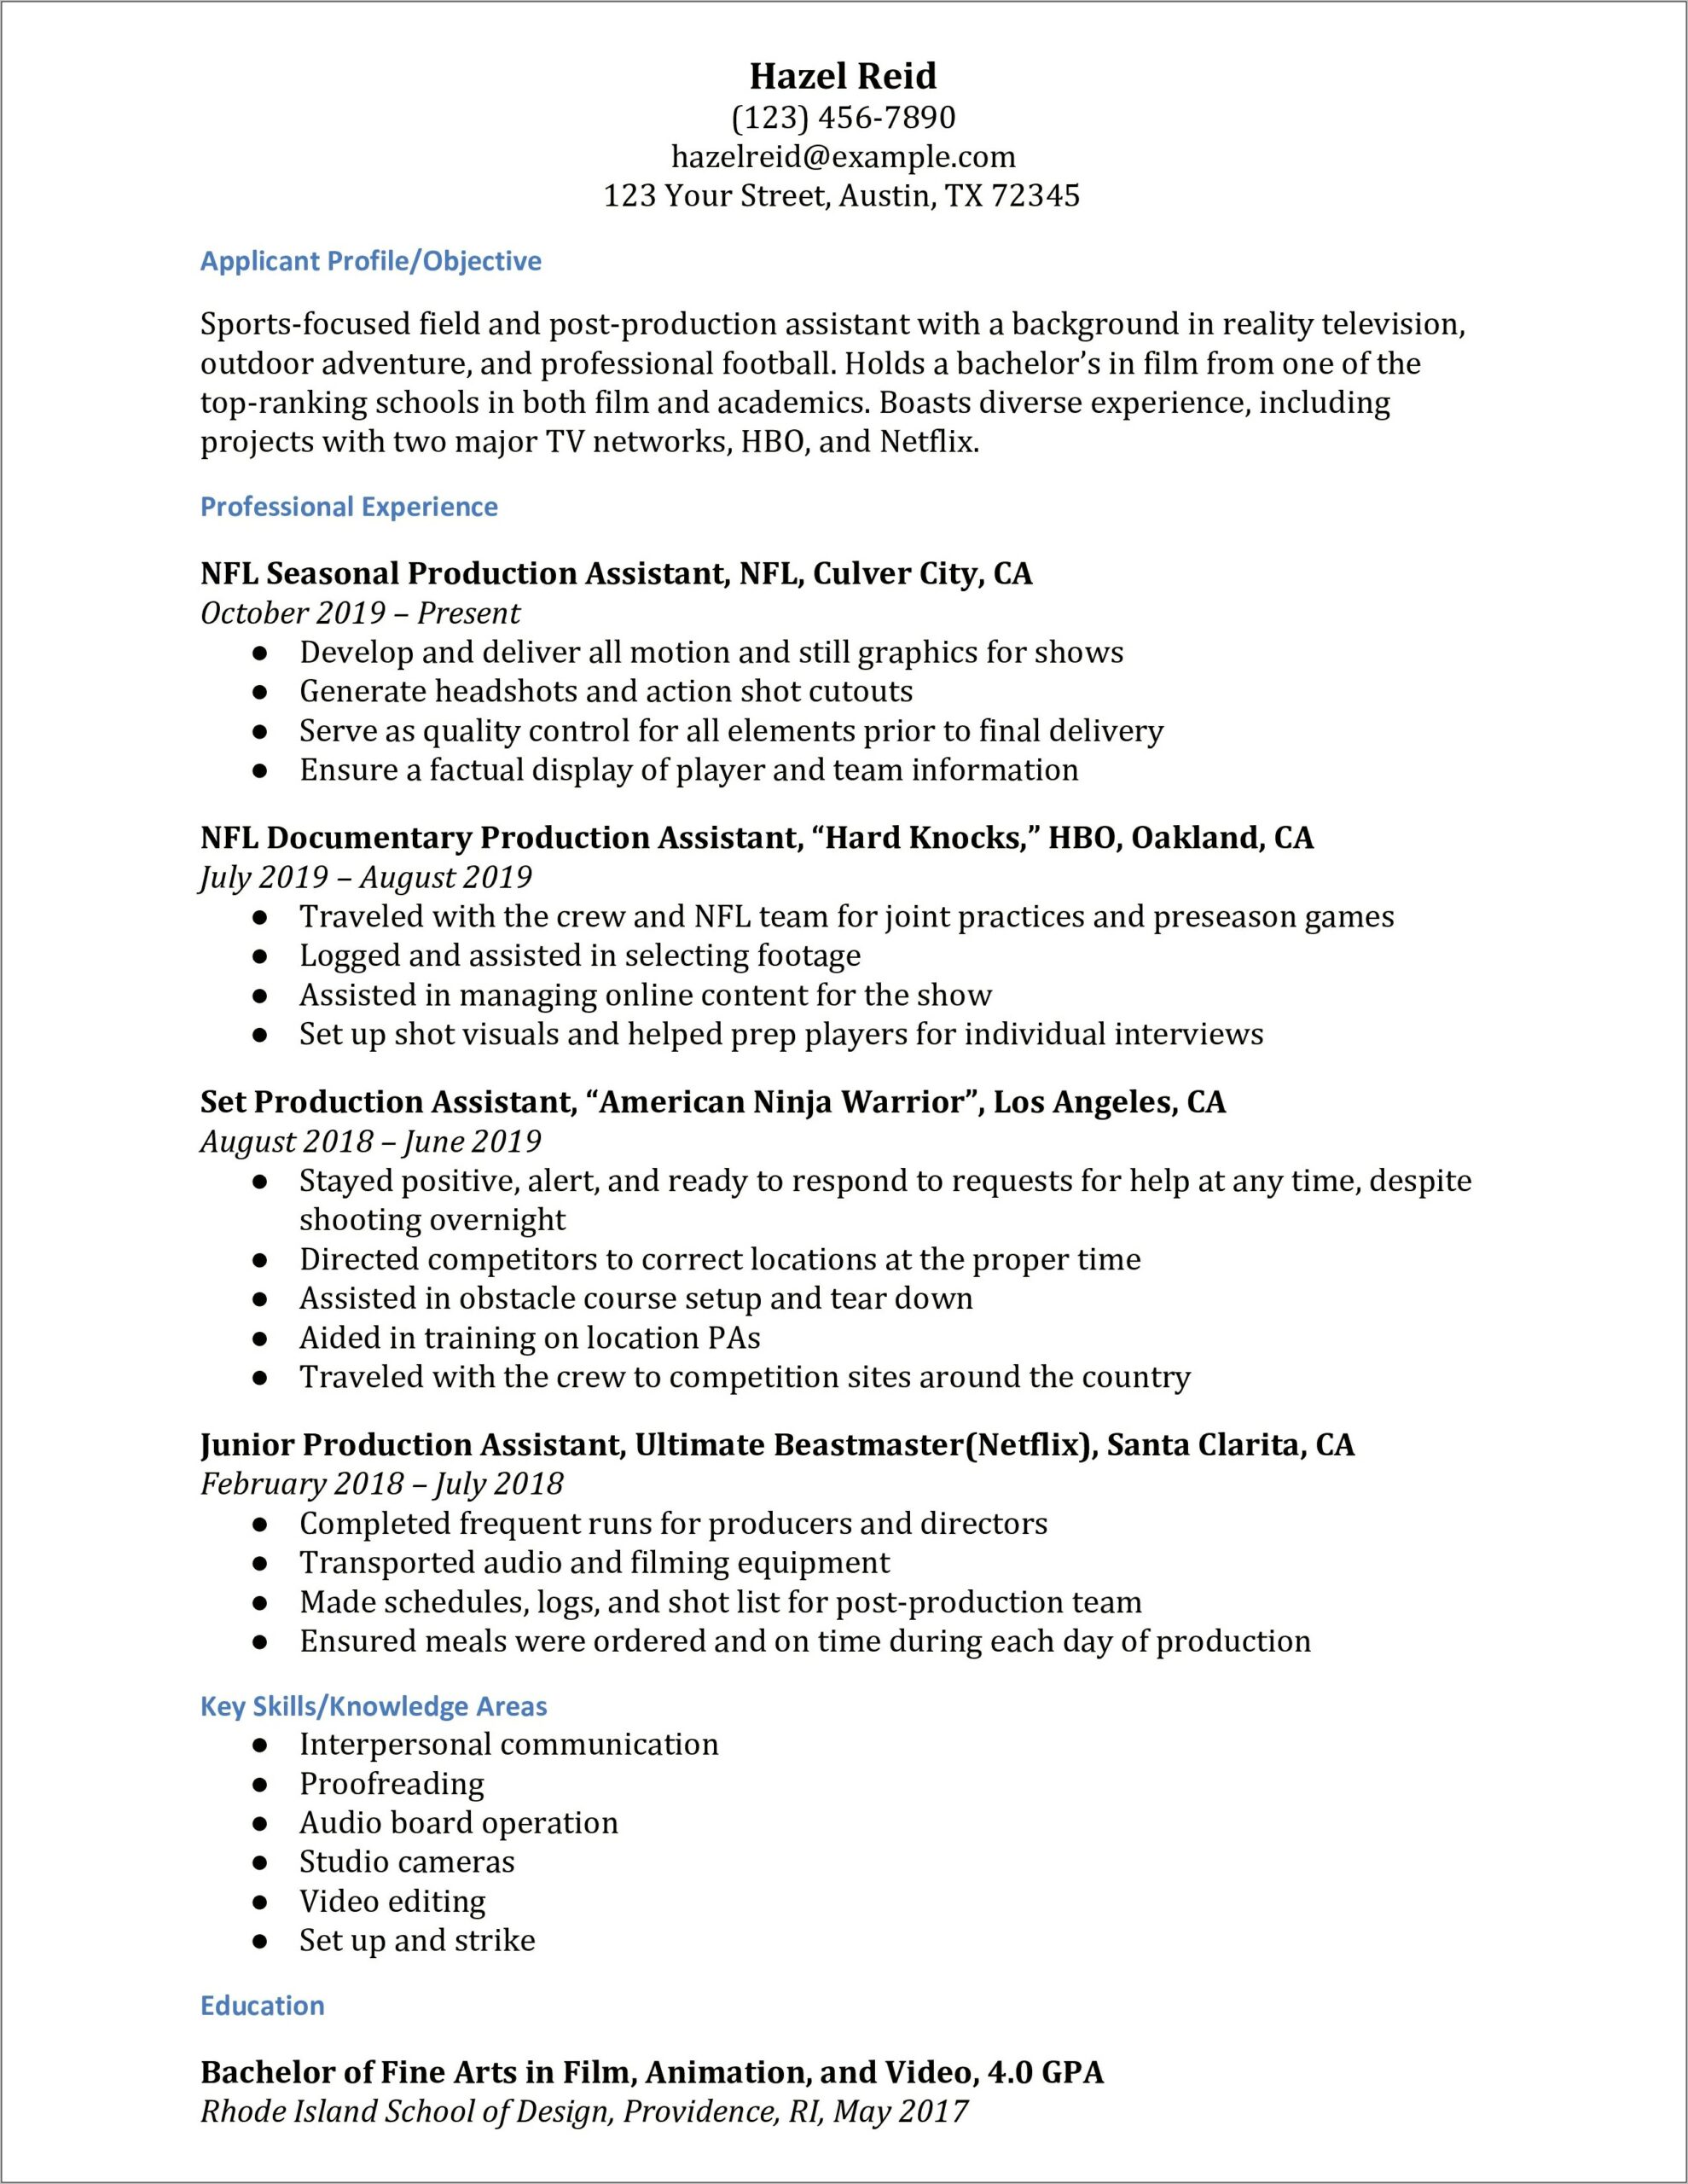 Resume Objective Examples For Production Assistant